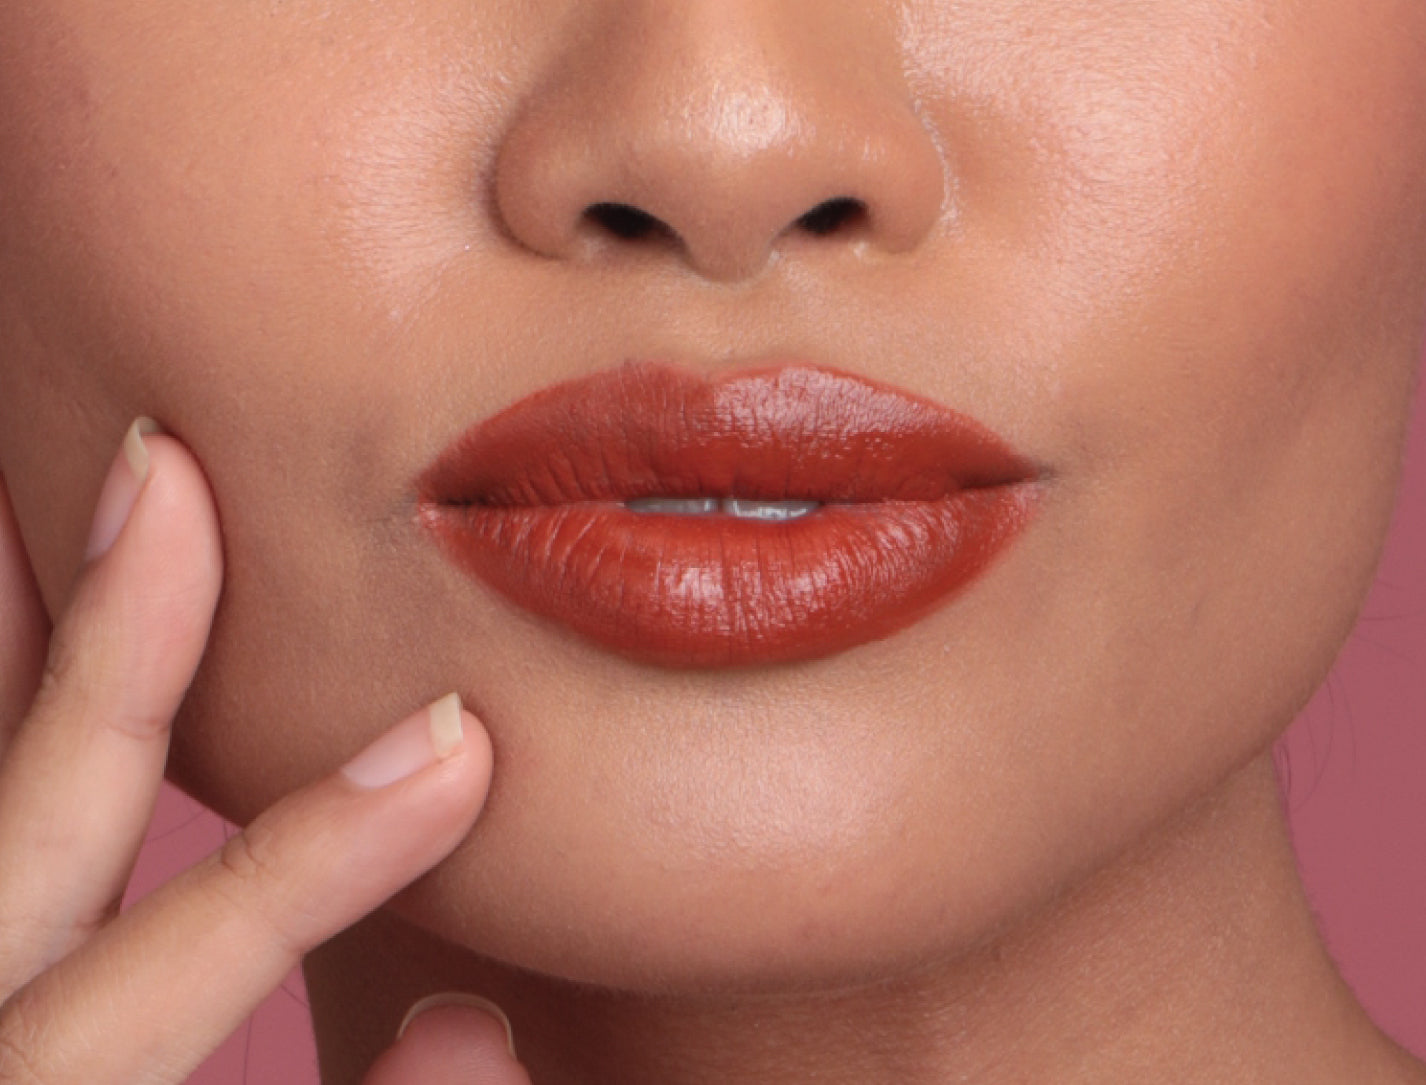 HOW TO | Lips 101: A Cheat Sheet for Your Best-Looking Lips